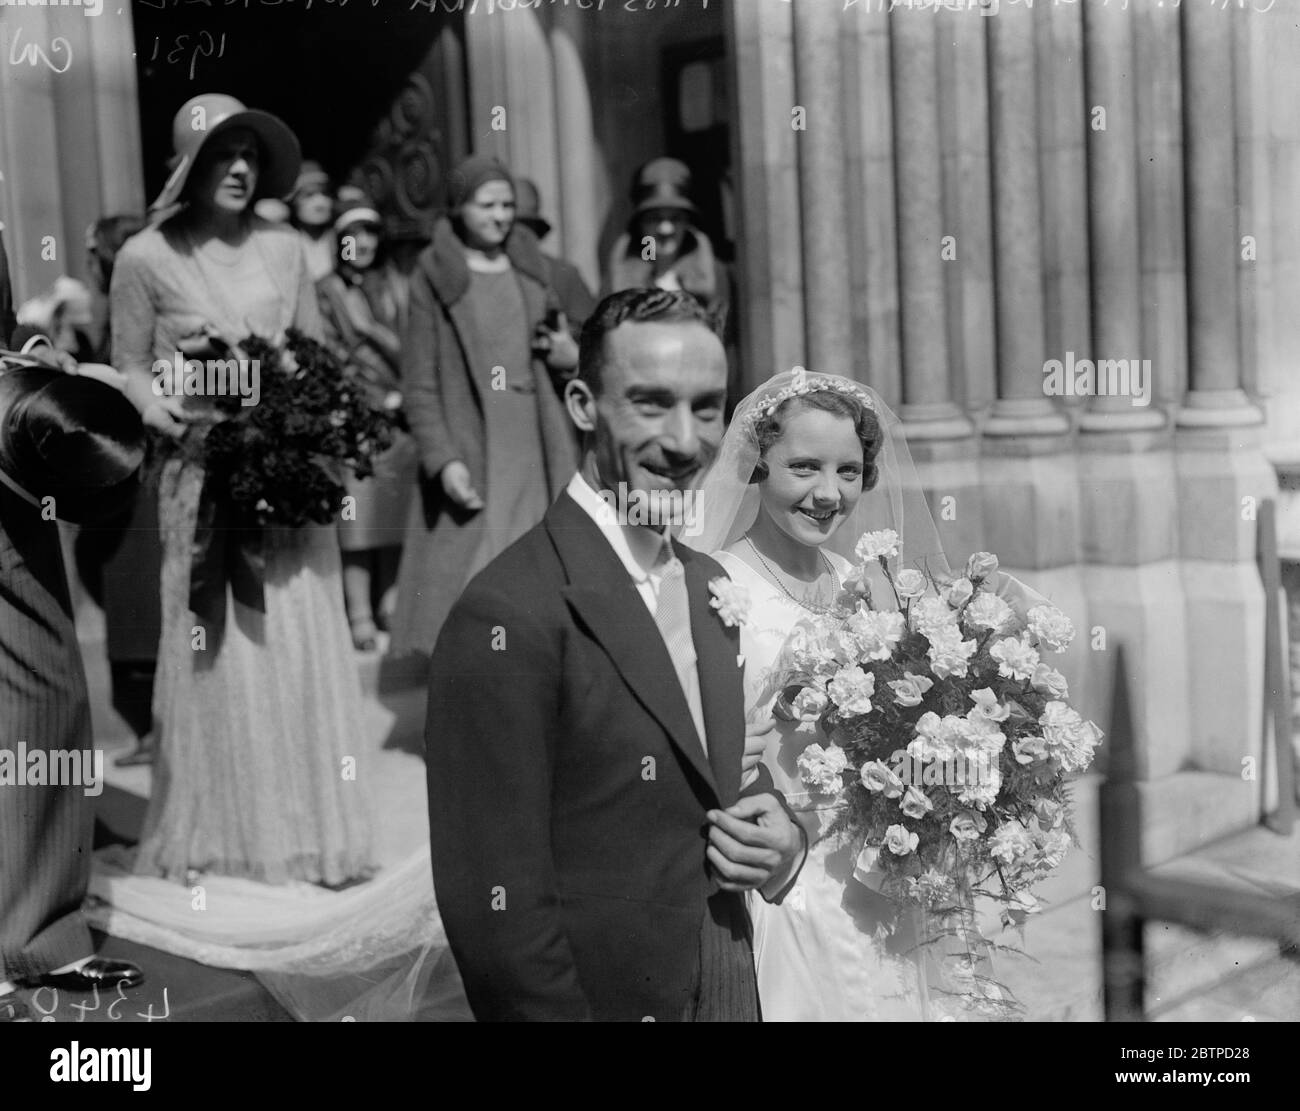 Society wedding . The wedding of Capt H G L Brain and Miss Barbara Mackenzie at St James ' s Church , Spanish Place . The smiling bride and bridegroom . 19 August 1931 Stock Photo